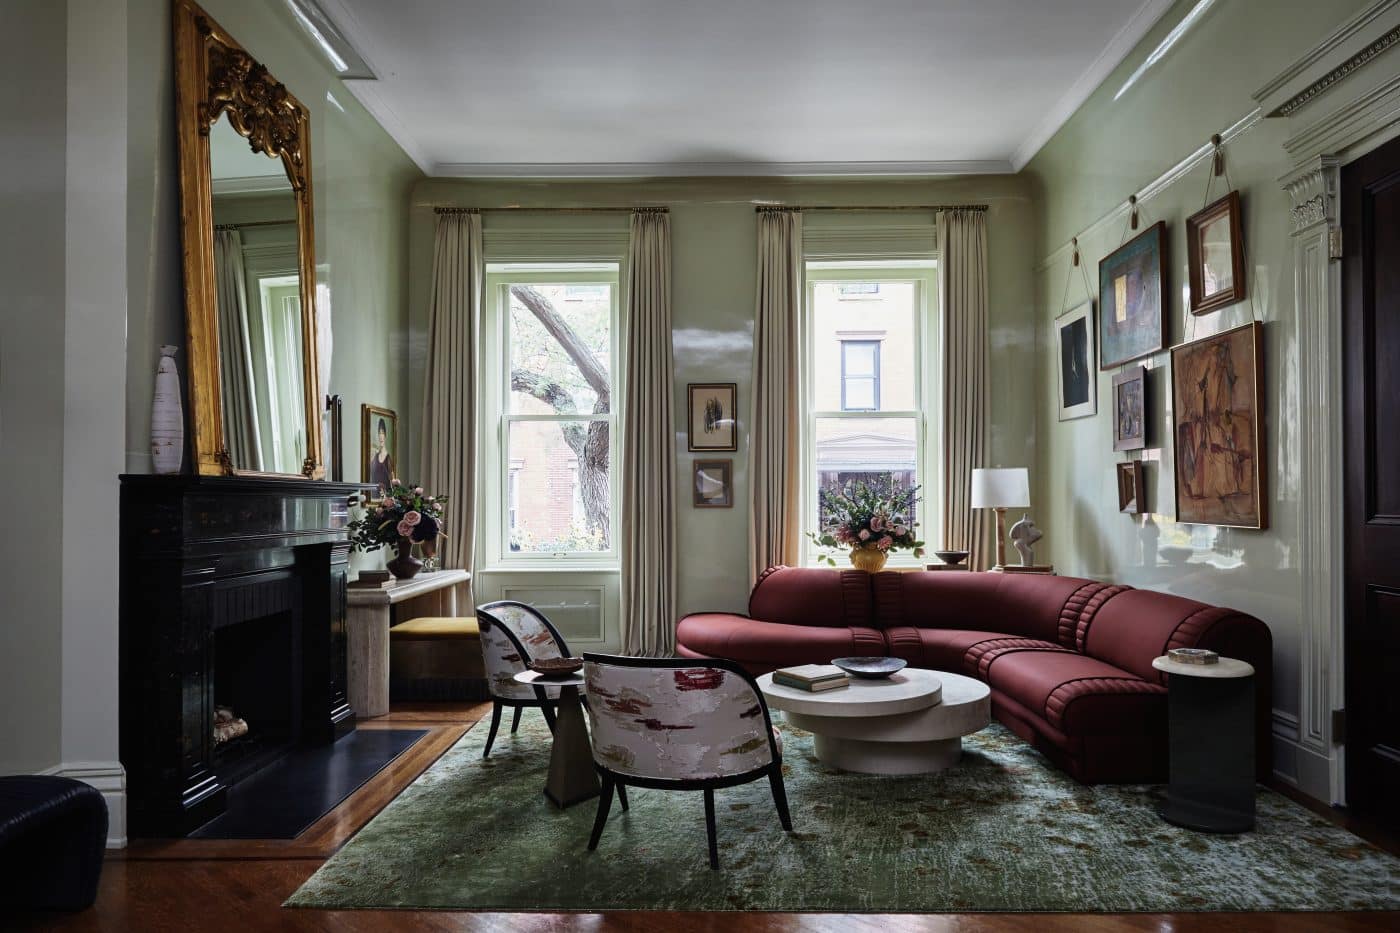 Brooklyn double parlor with pistachio lacquered walls designed by Jennifer Chused